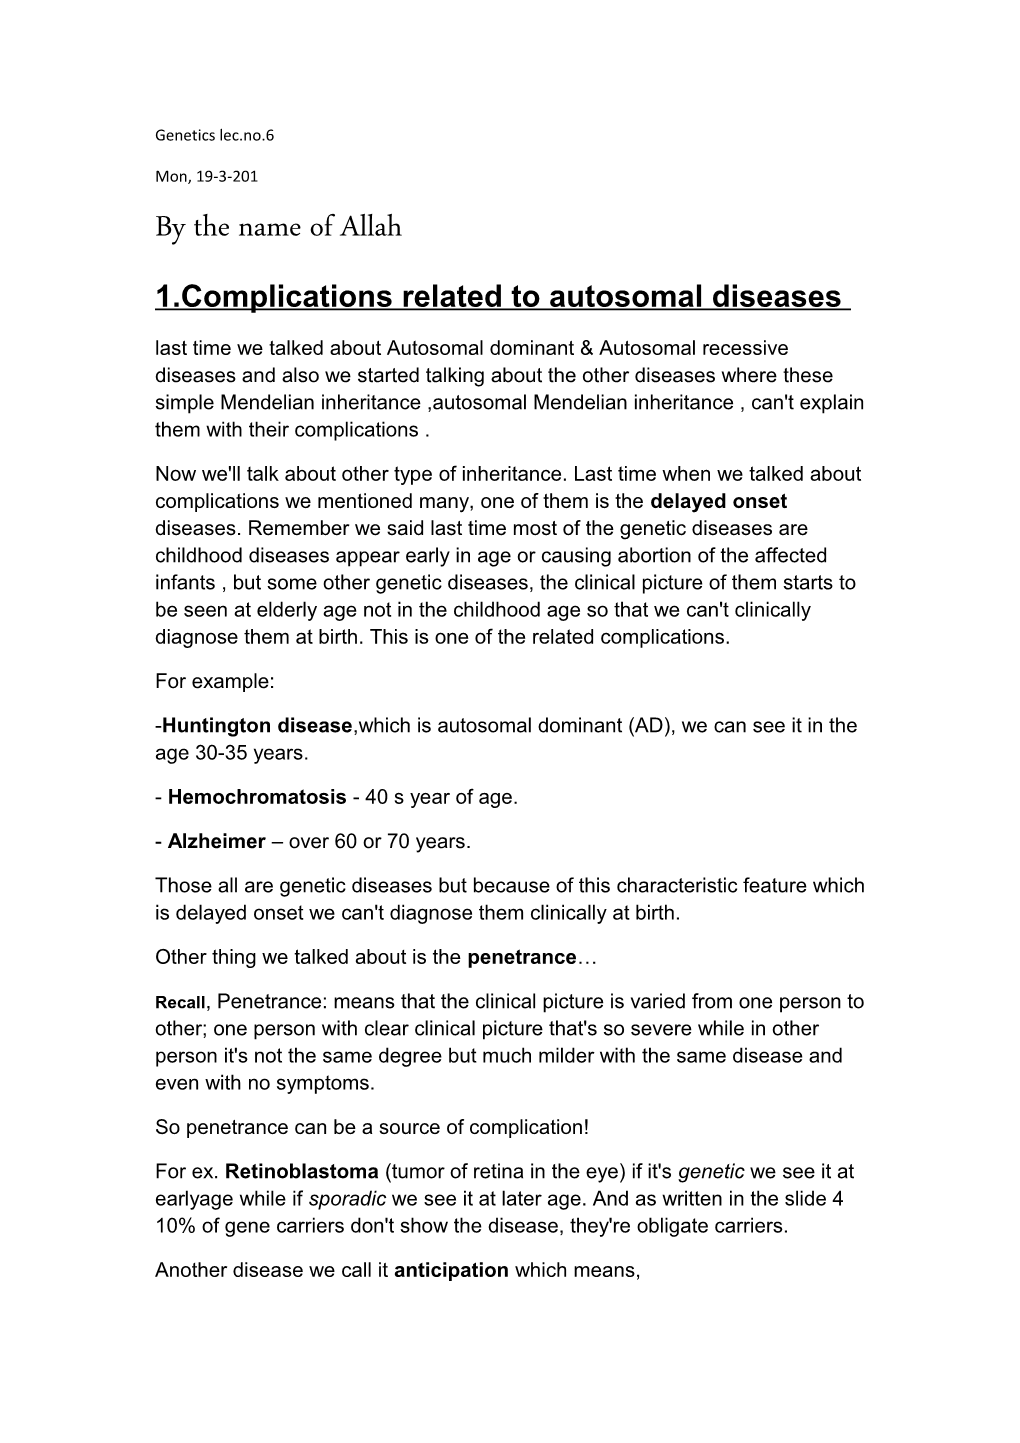 1.Complications Related to Autosomal Diseases